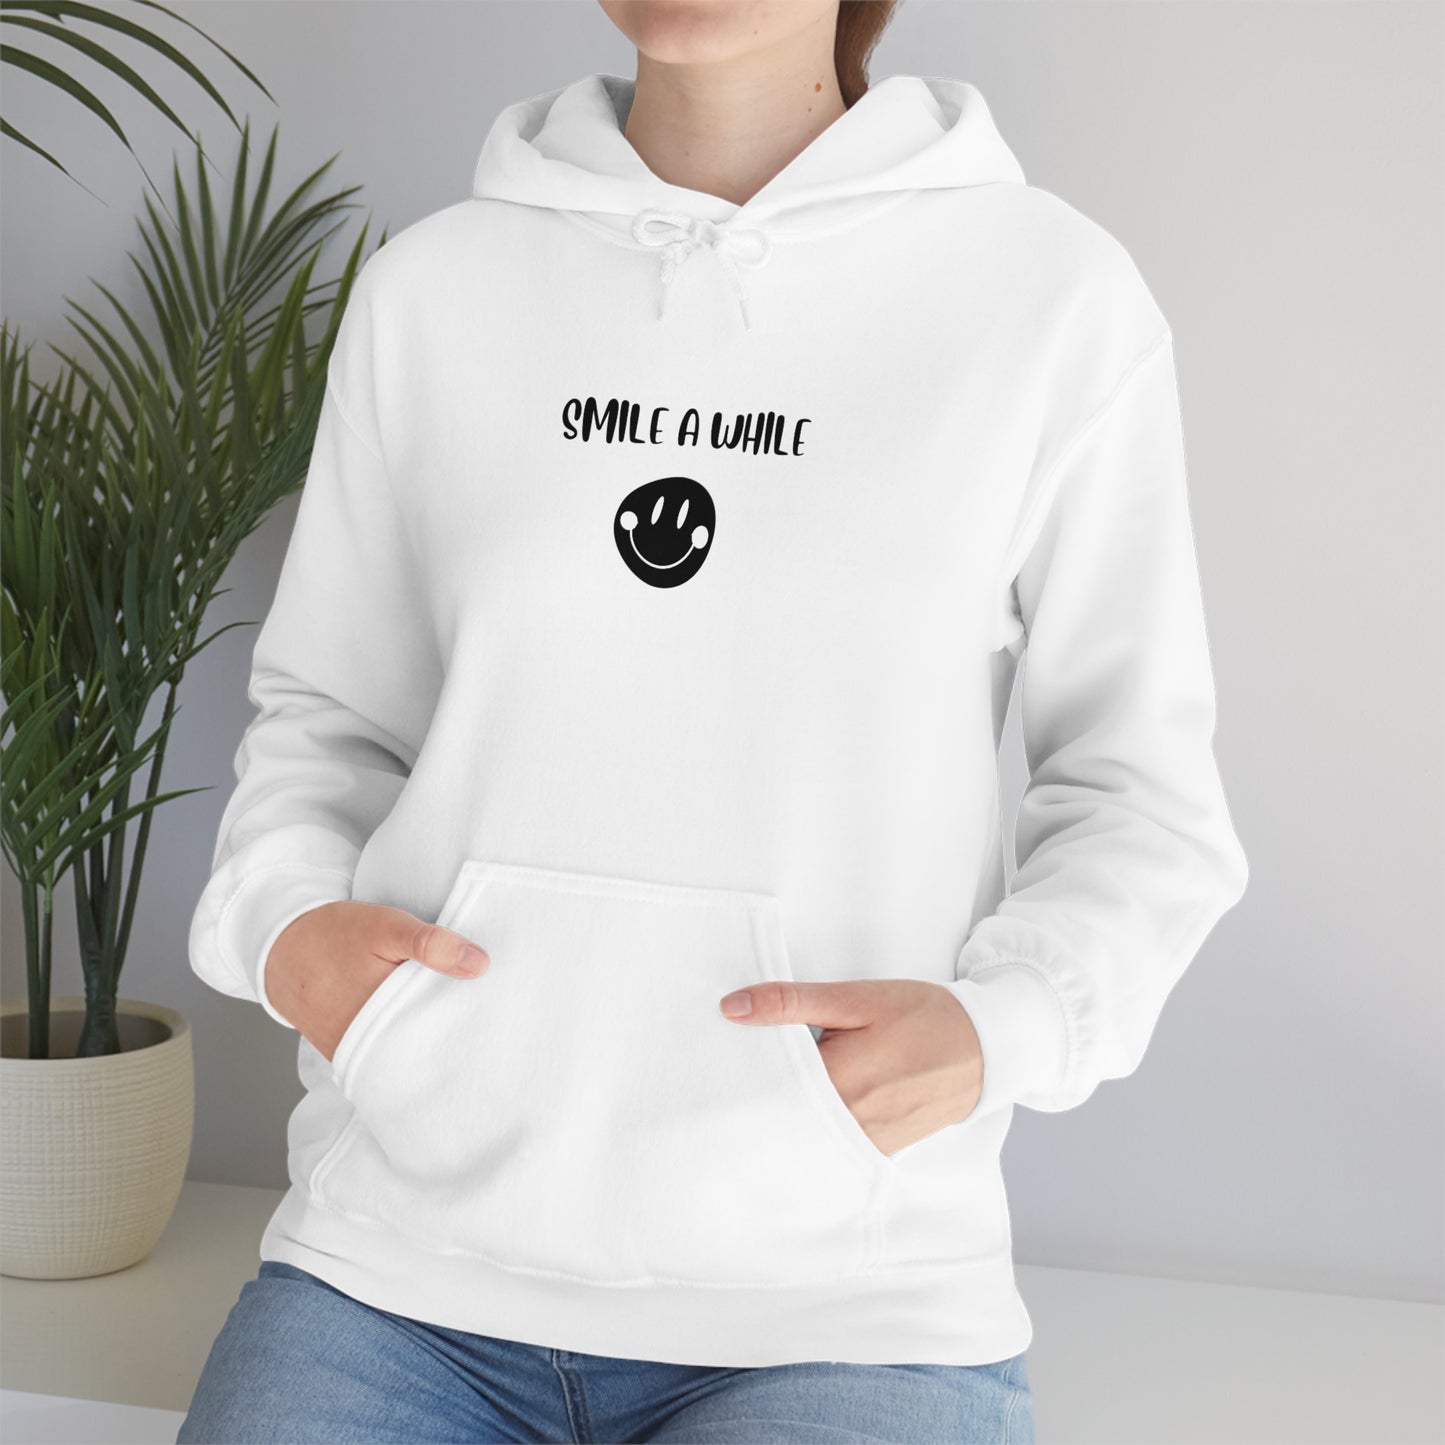 Smile a while  hooded sweathirt gift, inspirational words  hoodie gift,sweatshirt gift that motivates, hoodie gifts for friends